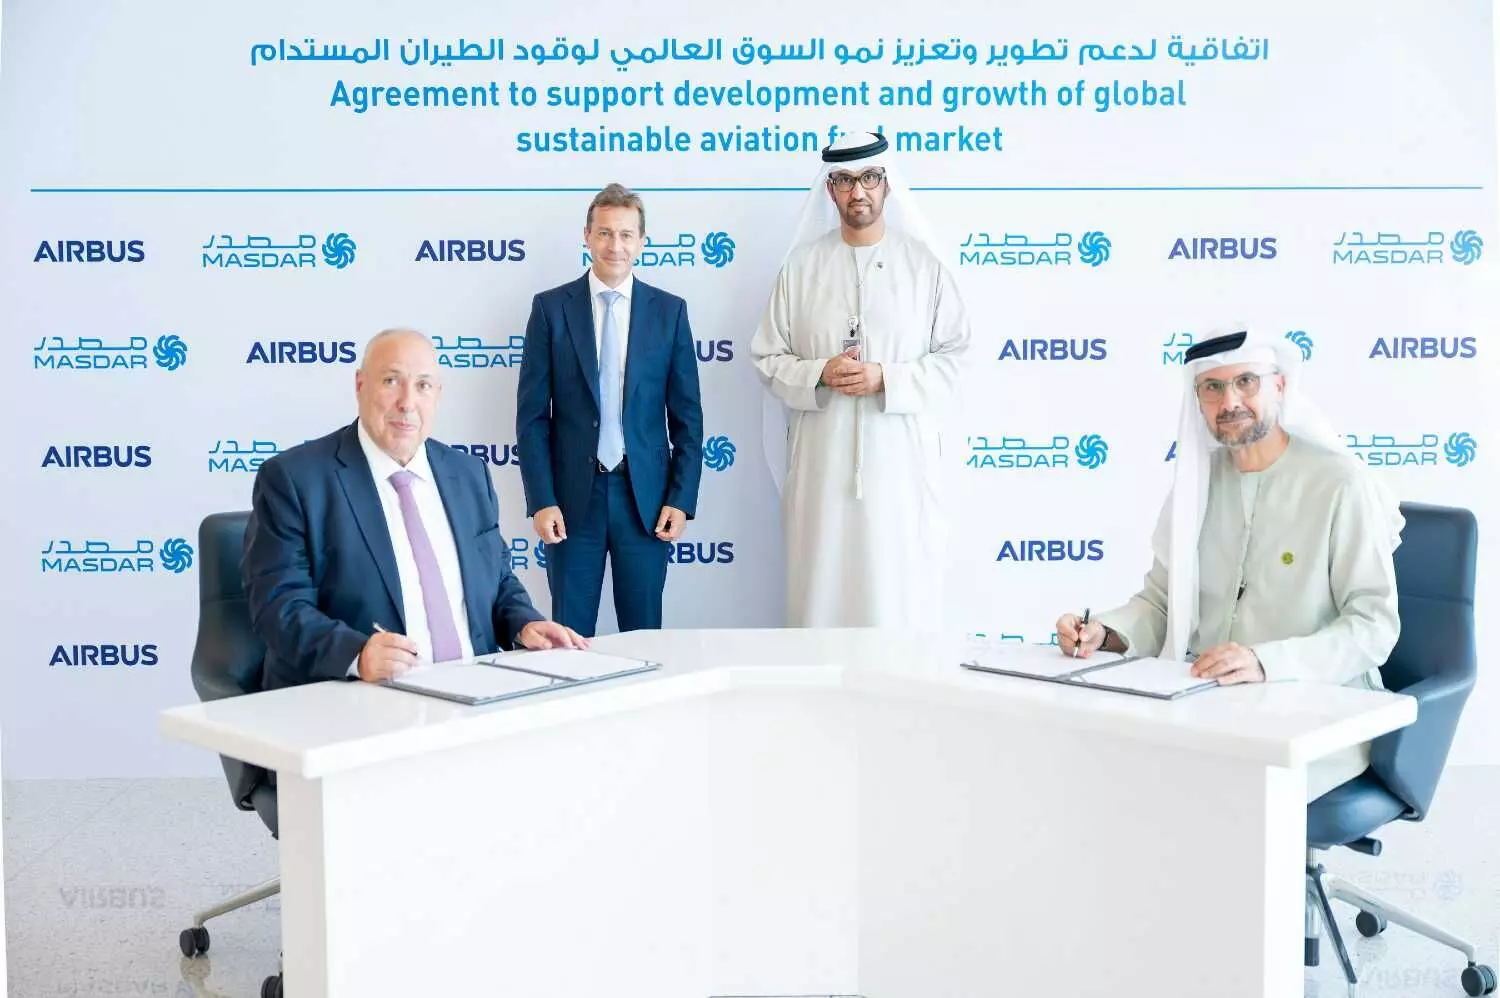 Masdar, Airbus sign agreement to support development and growth of global SAF market